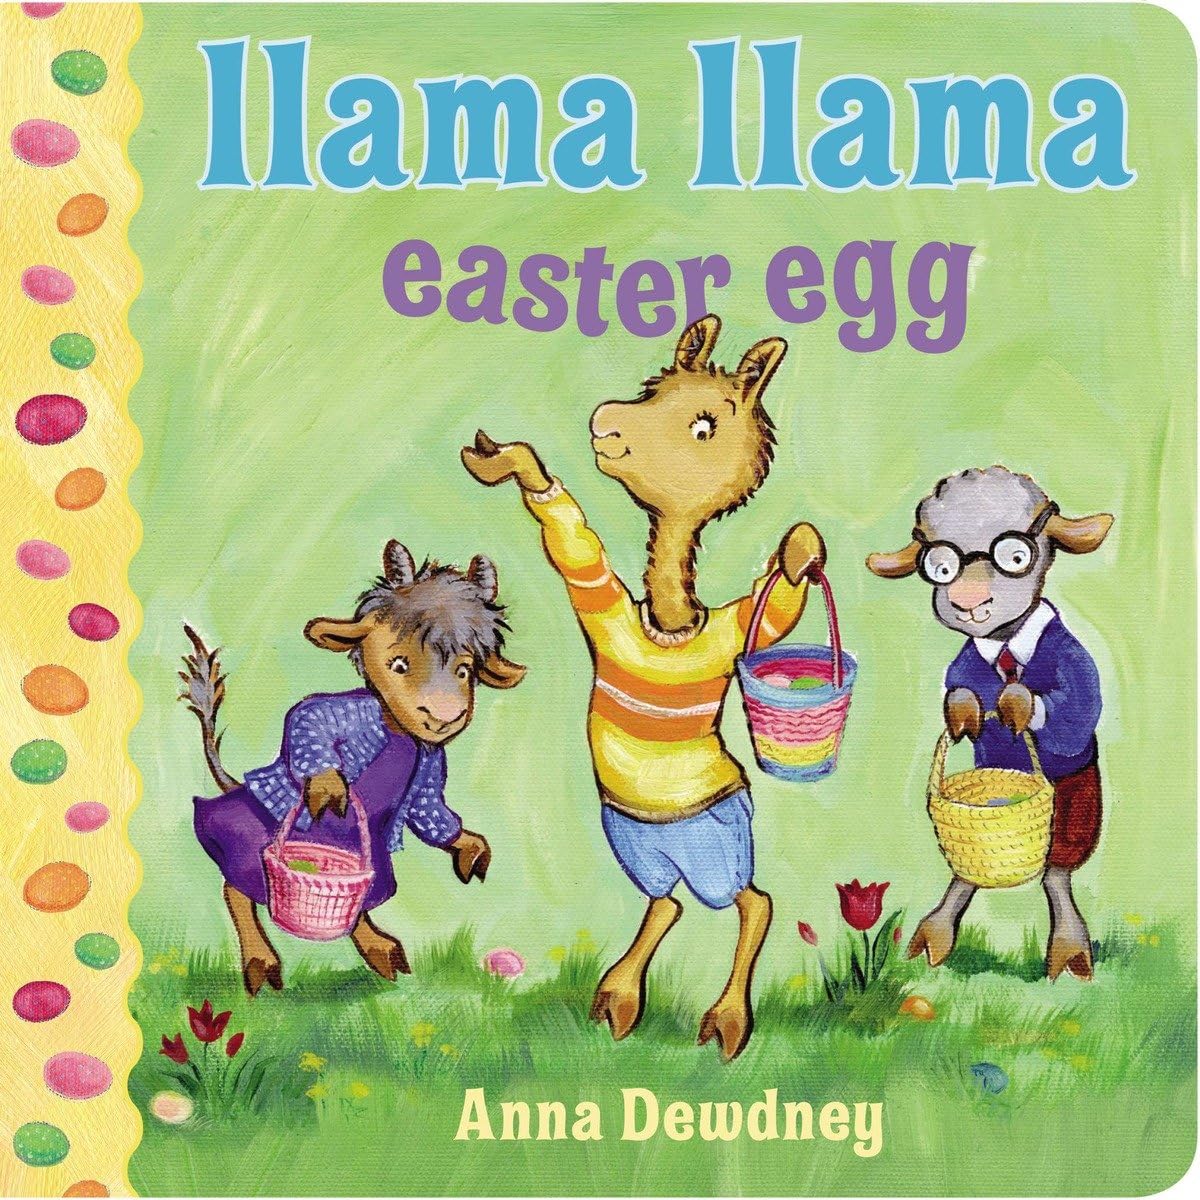 Buy One, Get One 1/2 Off on Easter Books for Babies, Llama Llama Easter Egg, Spot's Easter Surprise & More from $9.28 + Free Shipping w/ Prime or $35+ orders